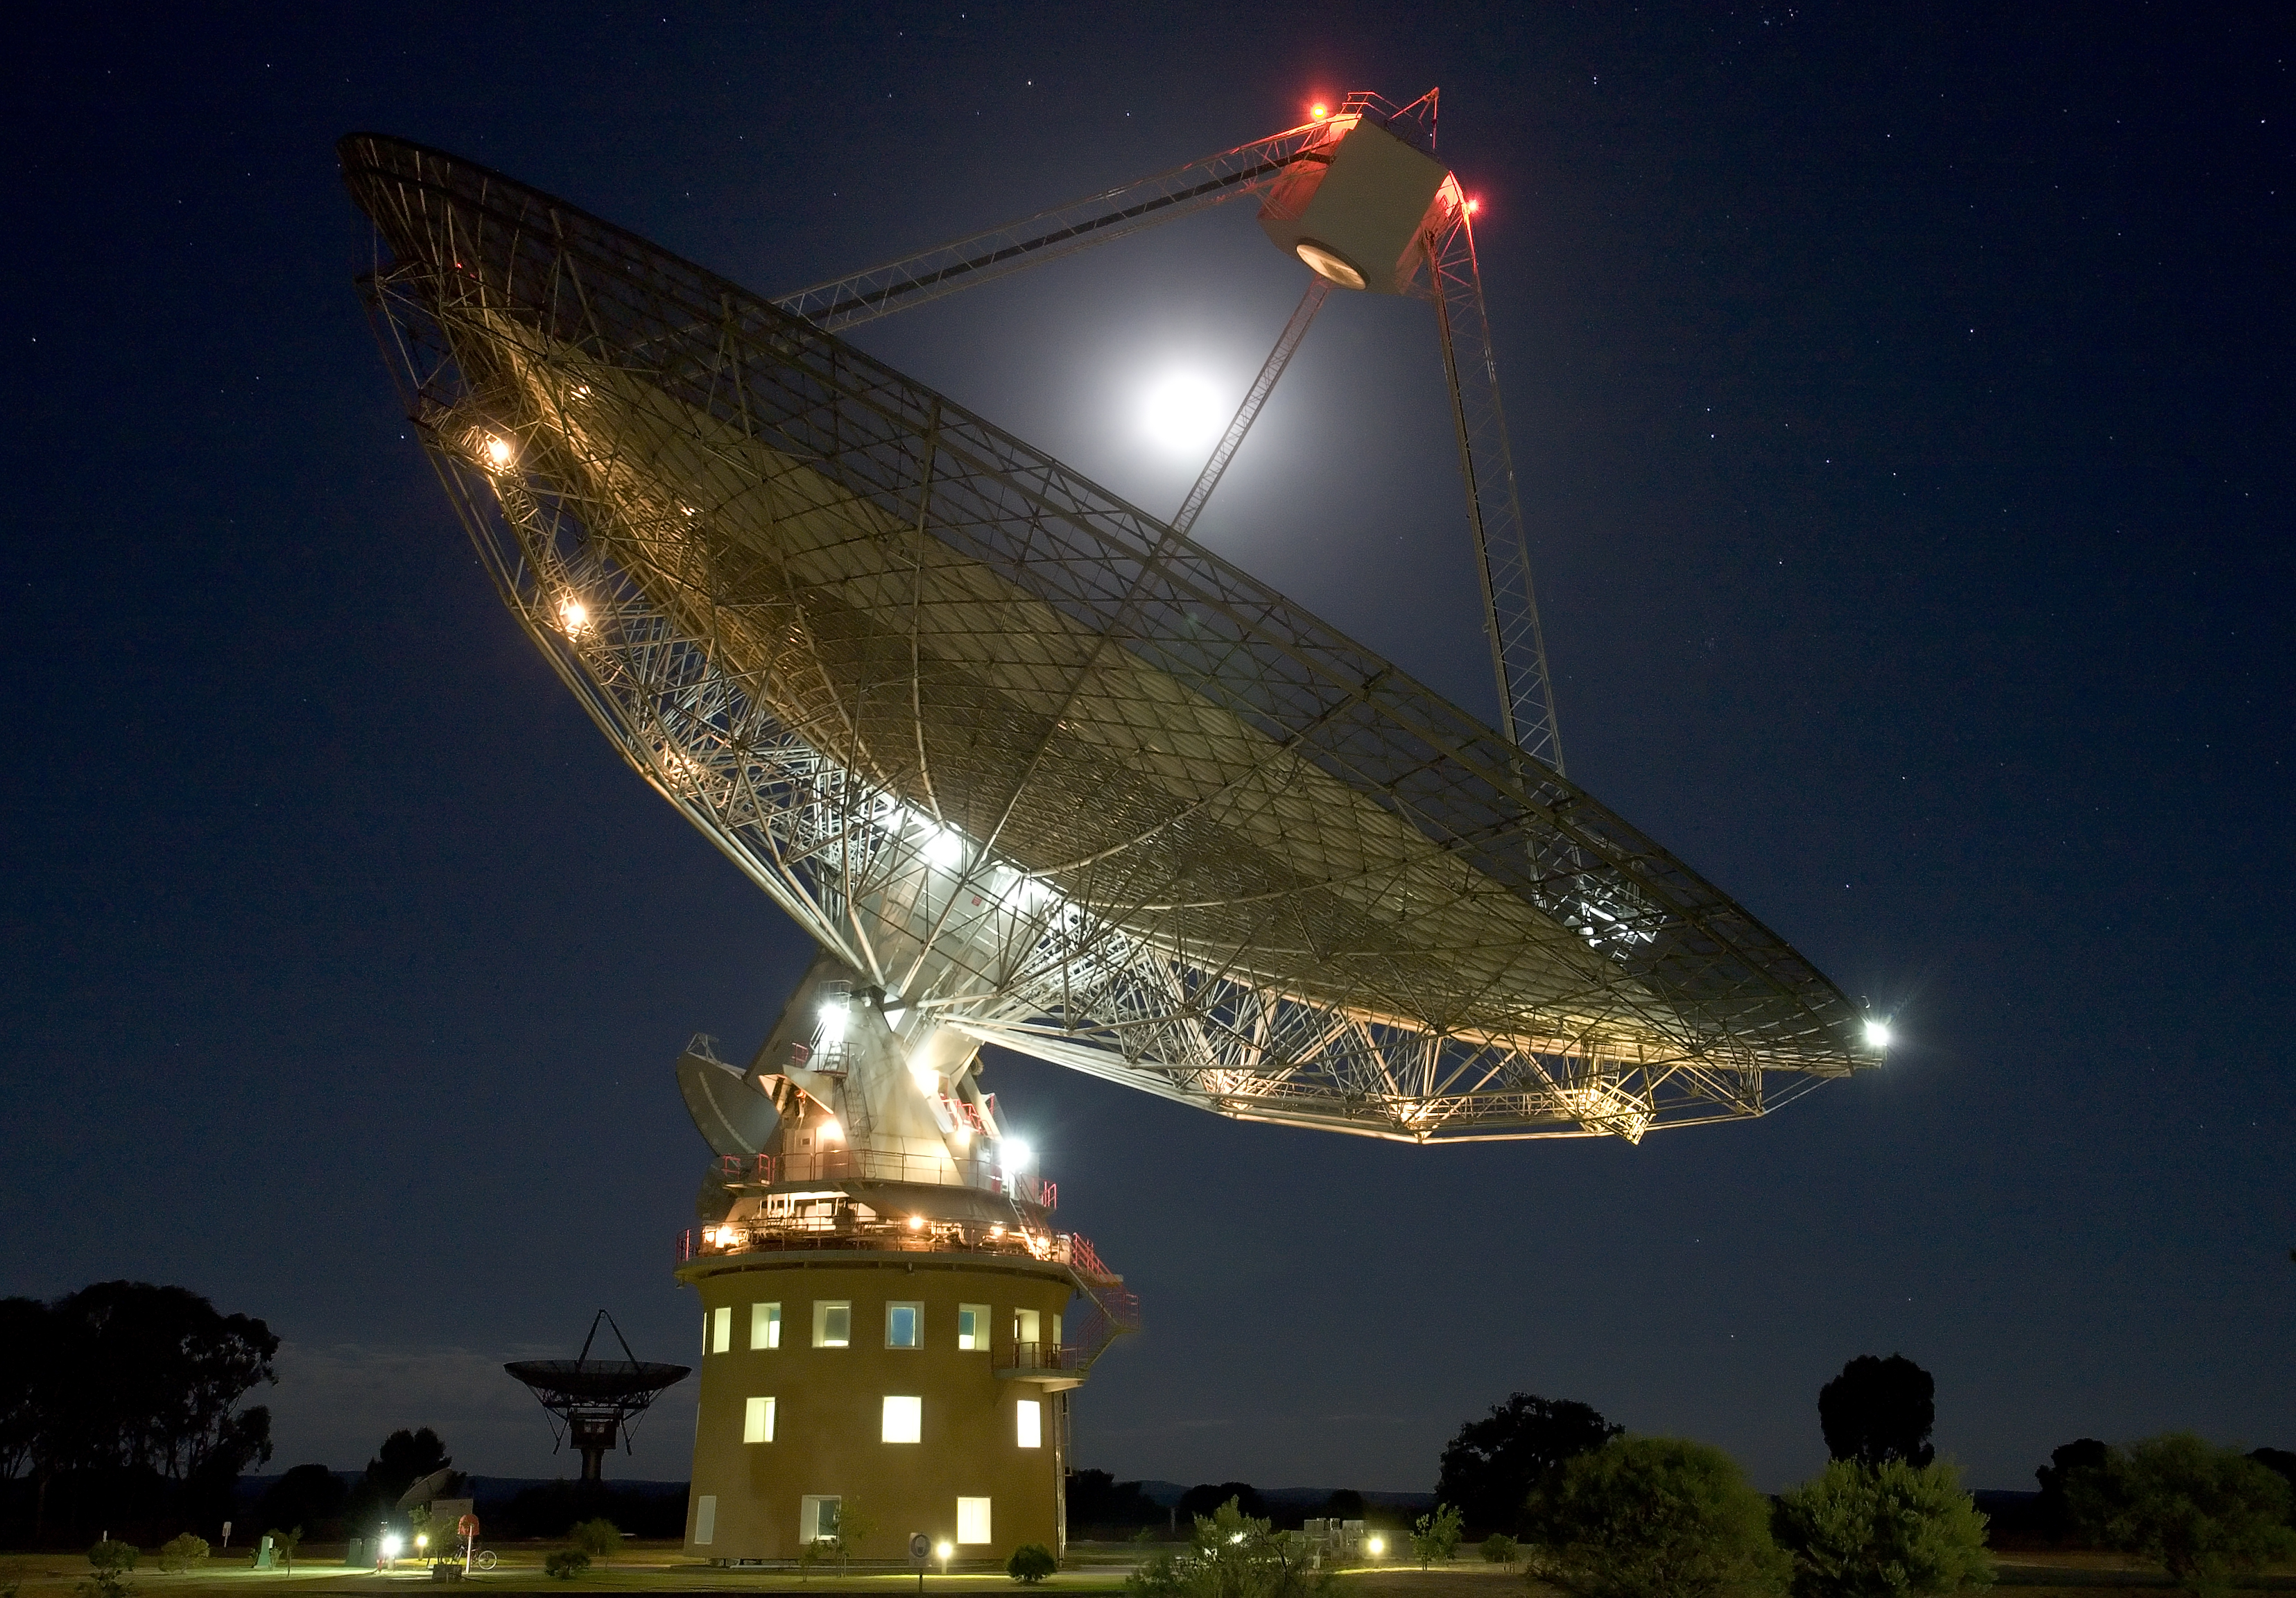 What's the source of mysterious radio signals at The Dish?